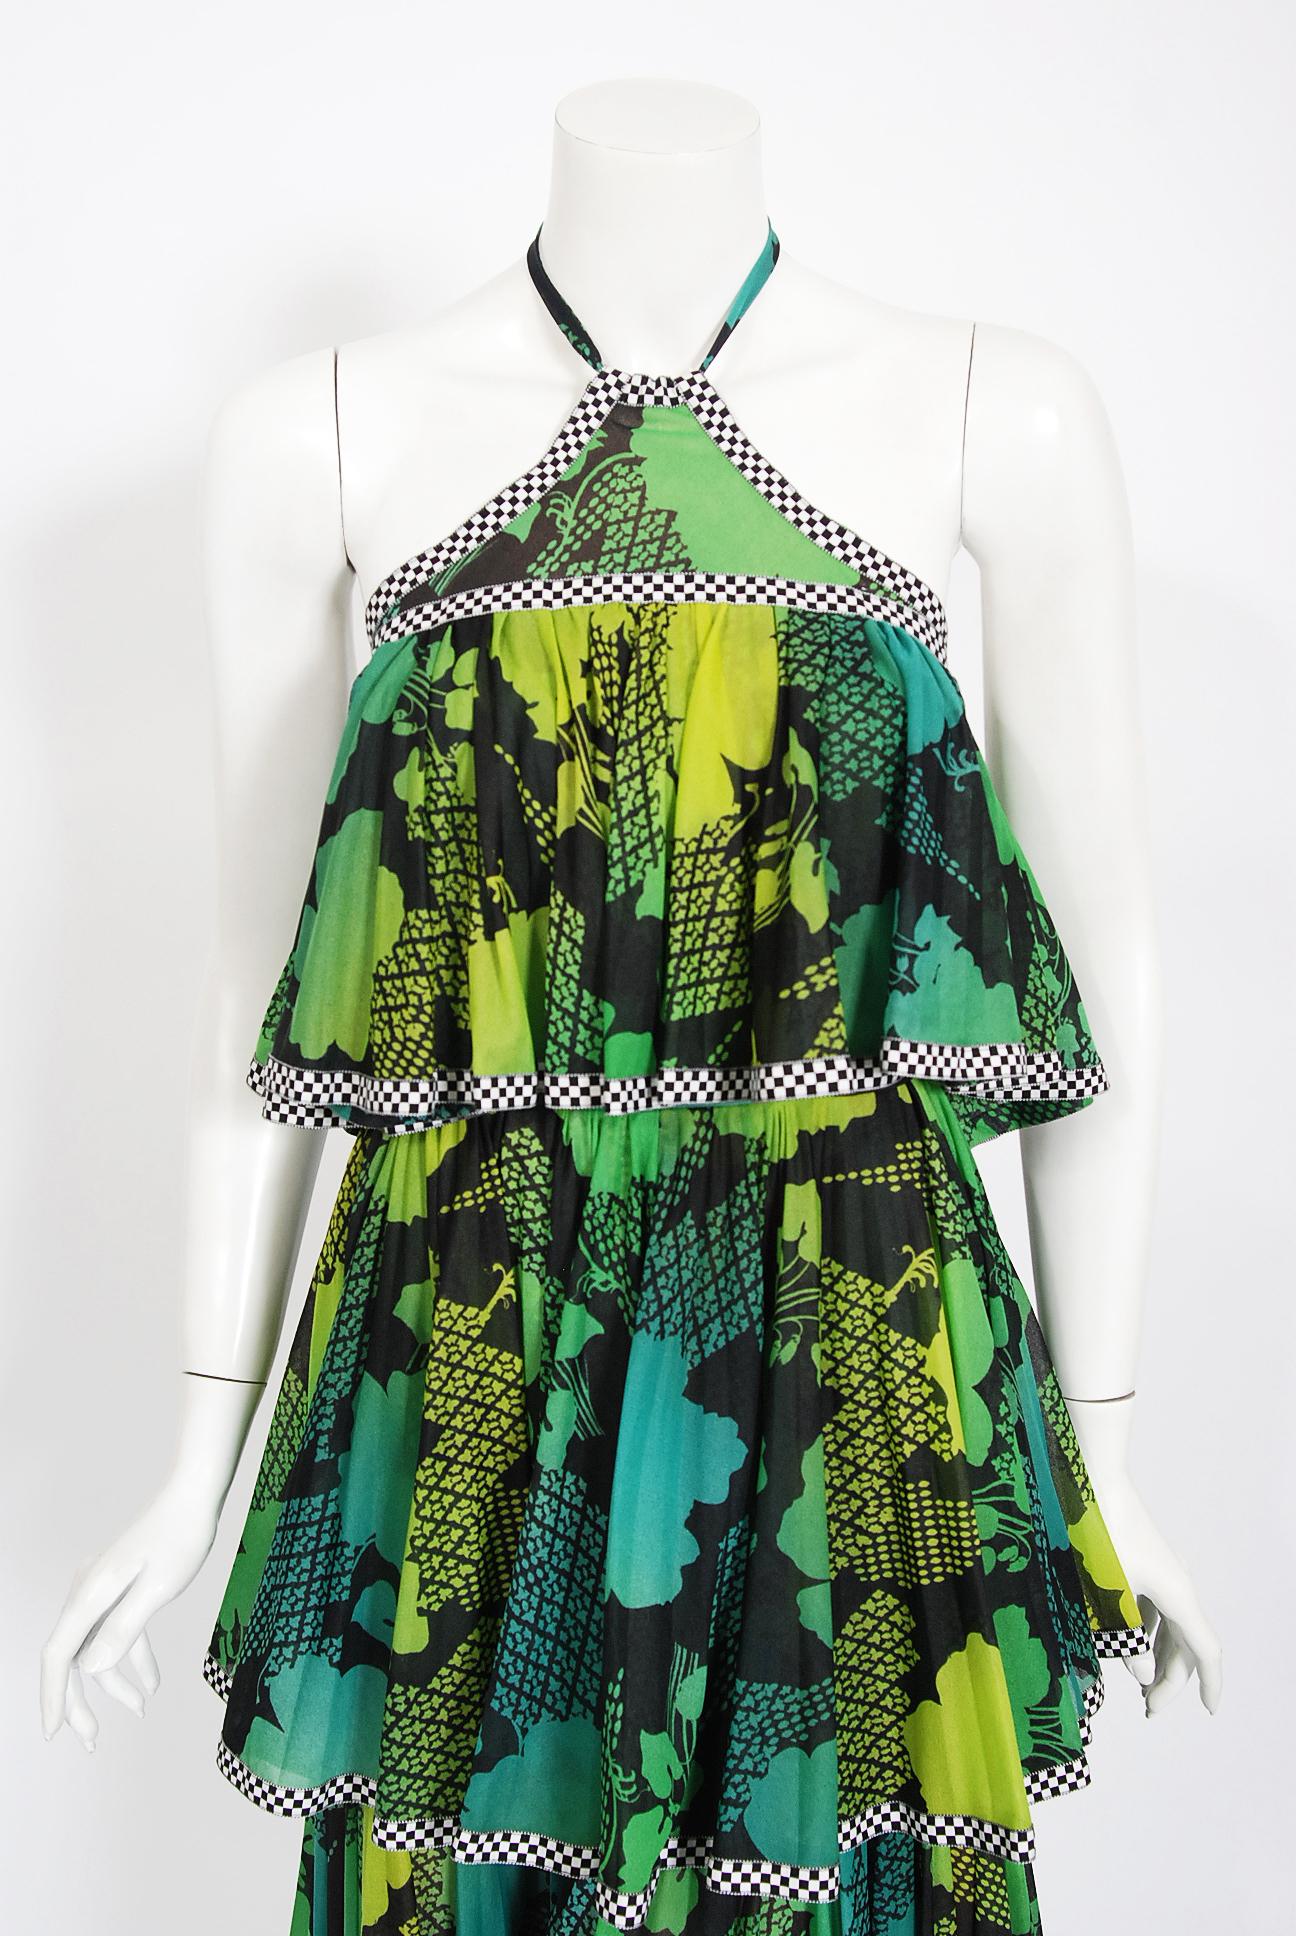 Gorgeous graphic green print dress, dating back to the early 1970's, by the famous Jean Varon label. John Bates started the Jean Varon label in 1960 and is possibly one of the greatest forgotten talents of the 1960's and 1970's. With no formal